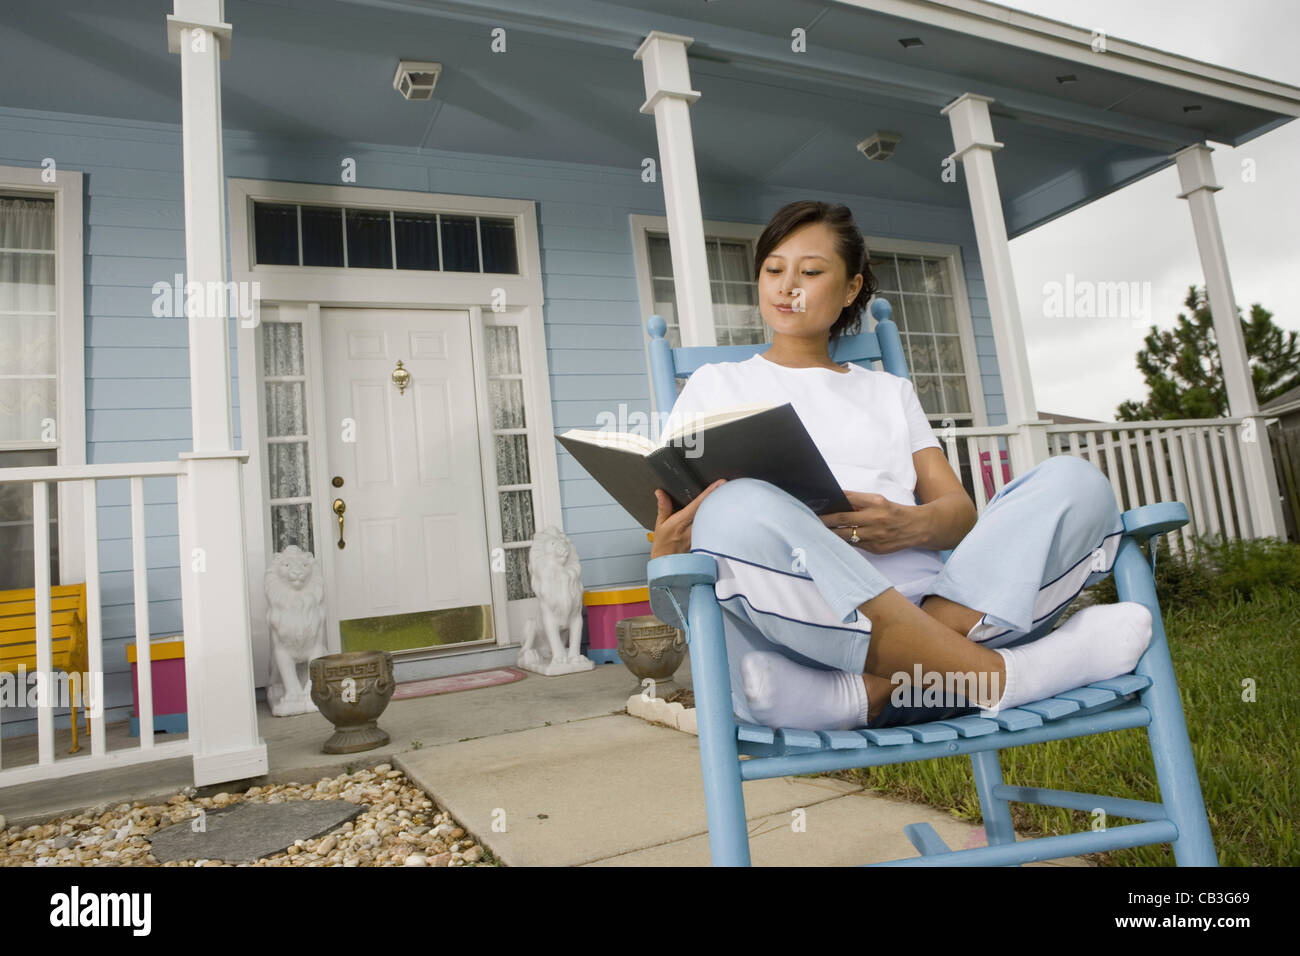 https://c8.alamy.com/comp/CB3G69/young-asian-woman-sitting-on-a-rocking-chair-reading-a-book-in-front-CB3G69.jpg